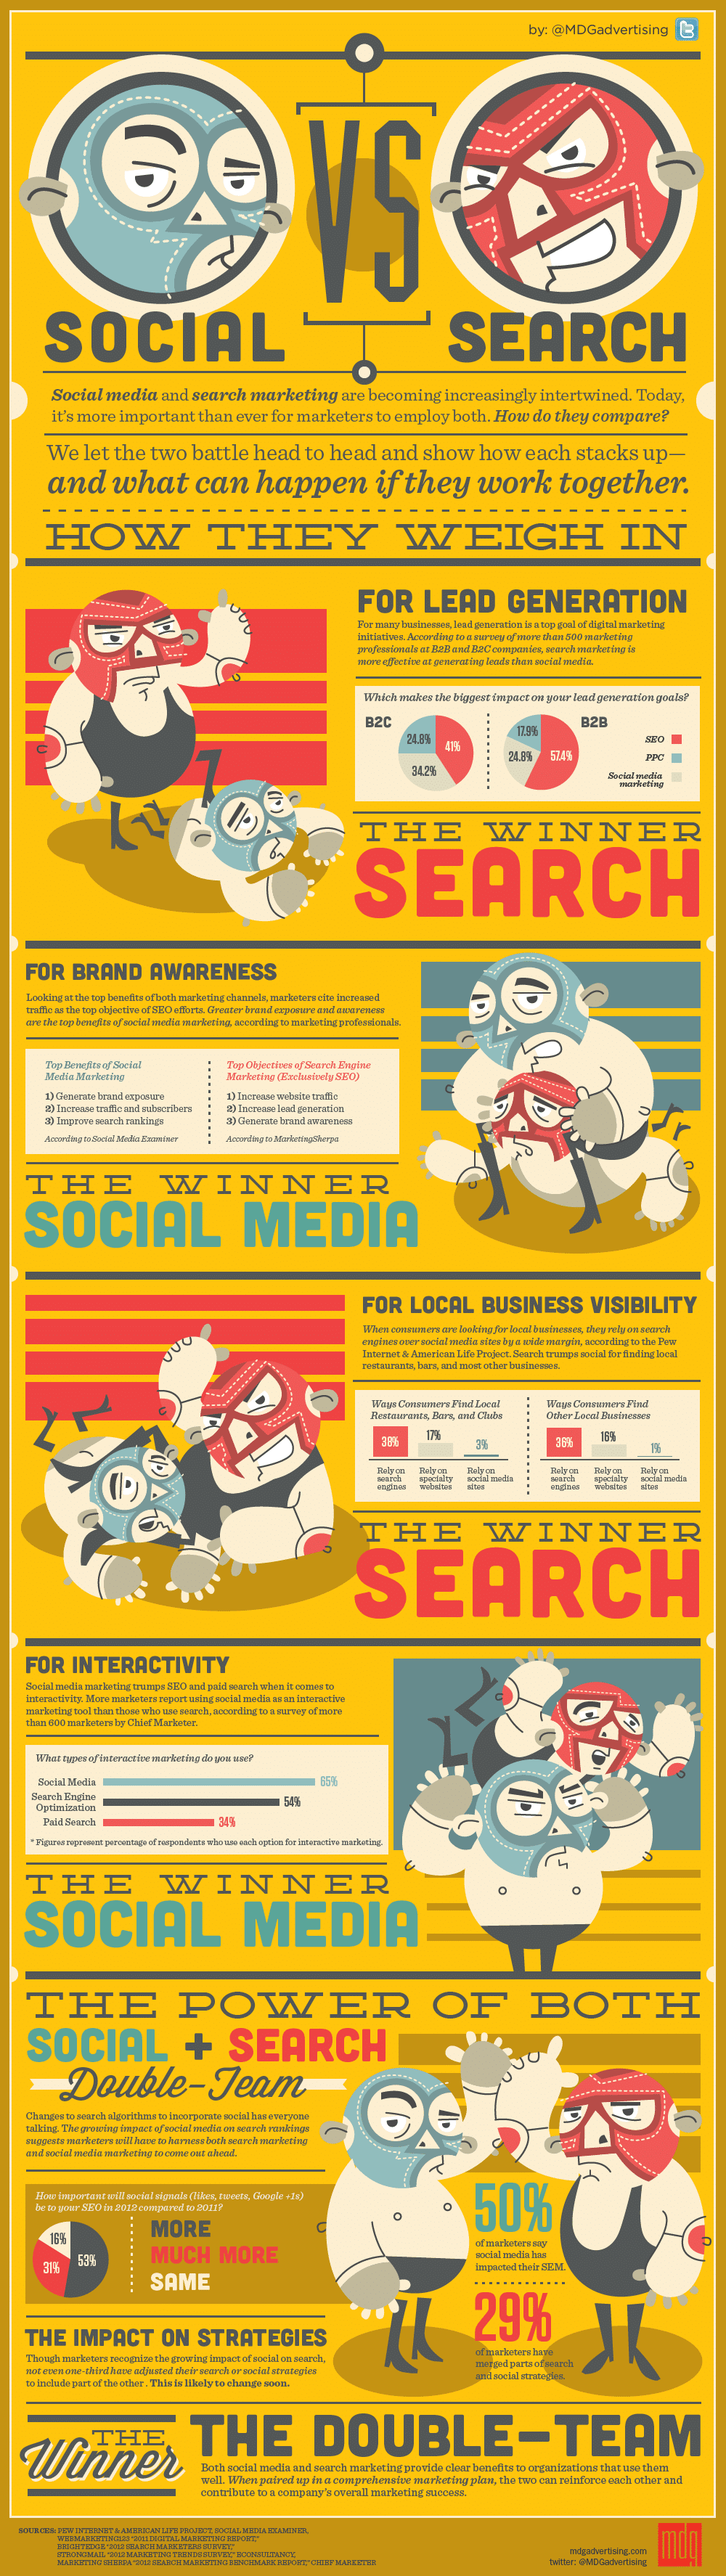 Social vs. Search Marketing: How They Compare [Infographic]